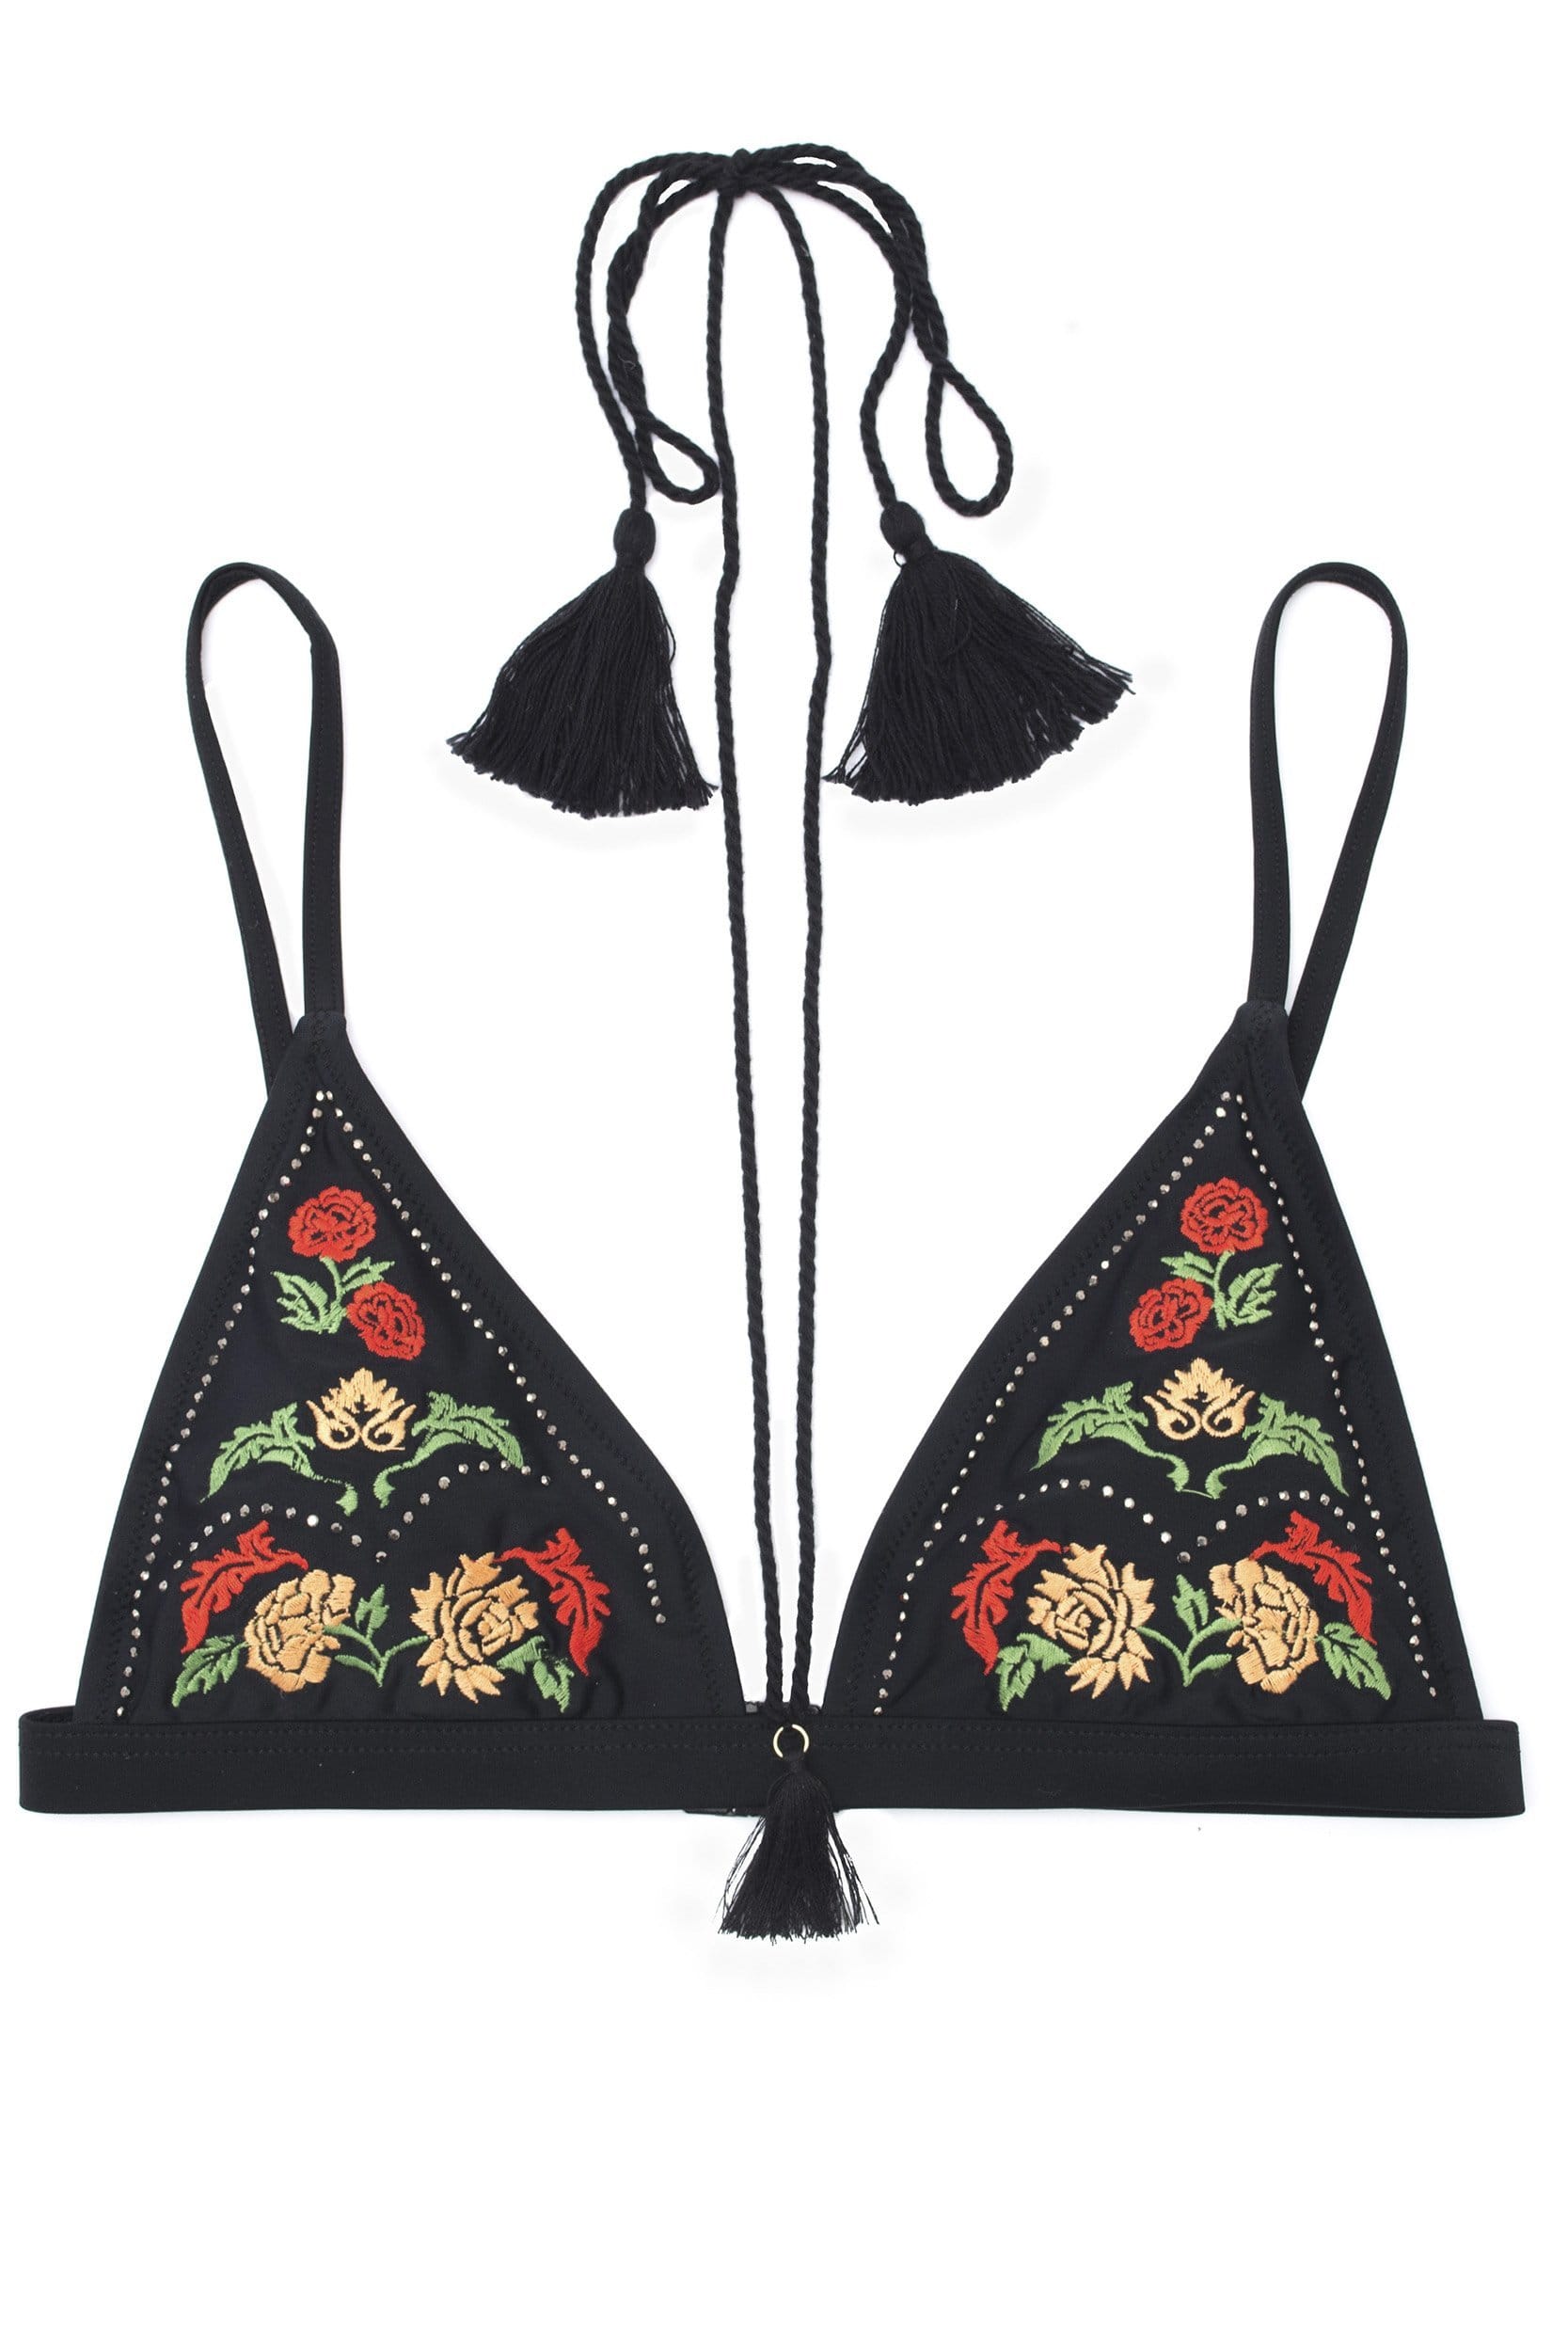 Wolf & Whistle Mayla Embroidered Bikini top with tassles